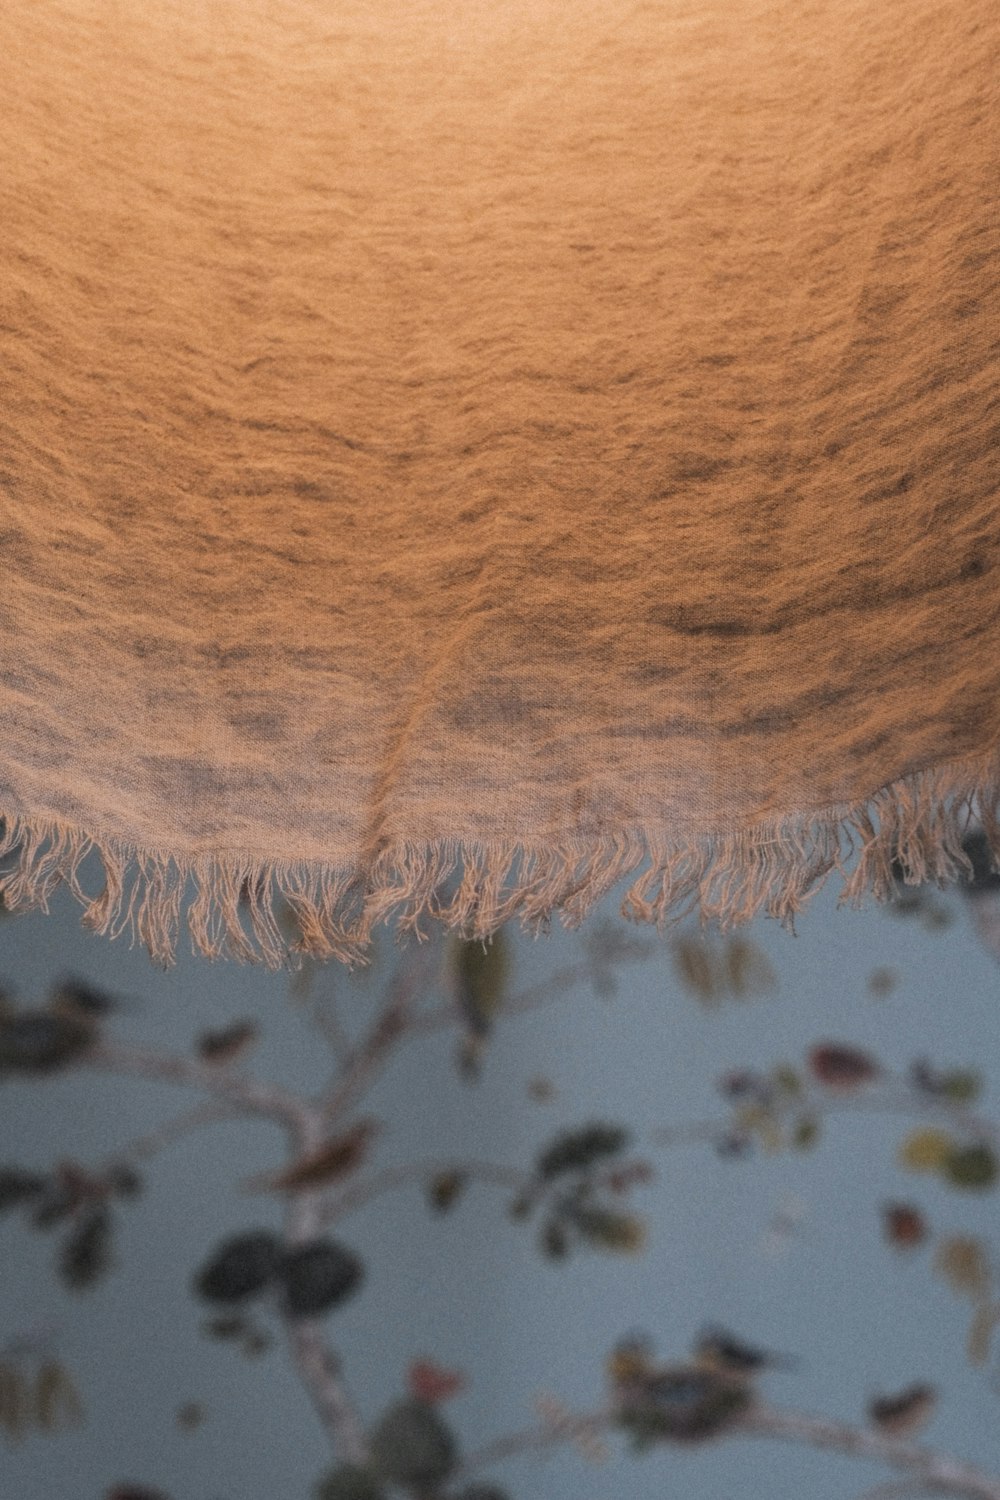 a close up of a blanket on a bed